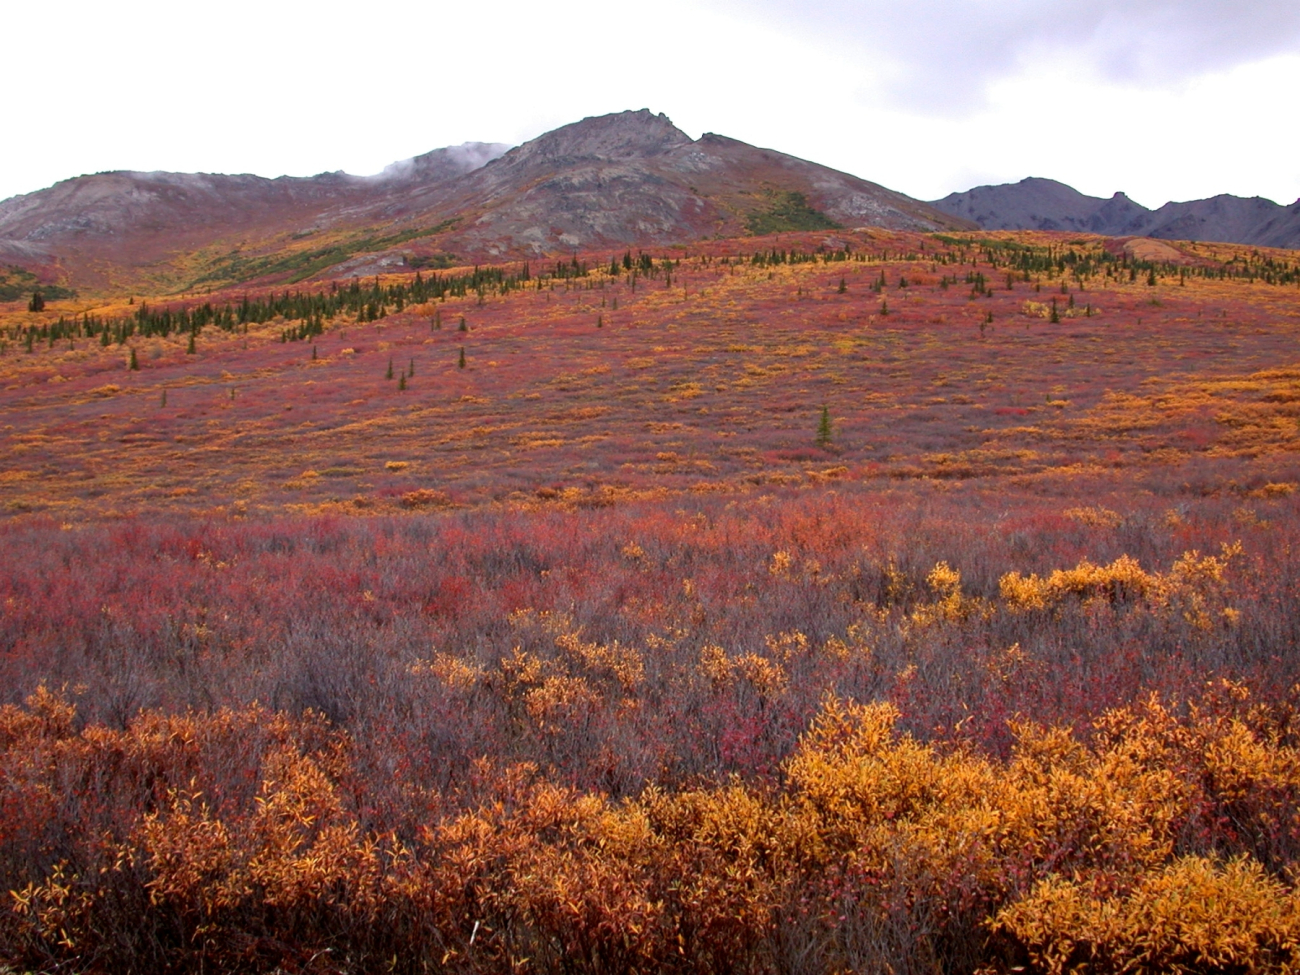 Near the tree line at higher elevations with fall colors north of Anchorage